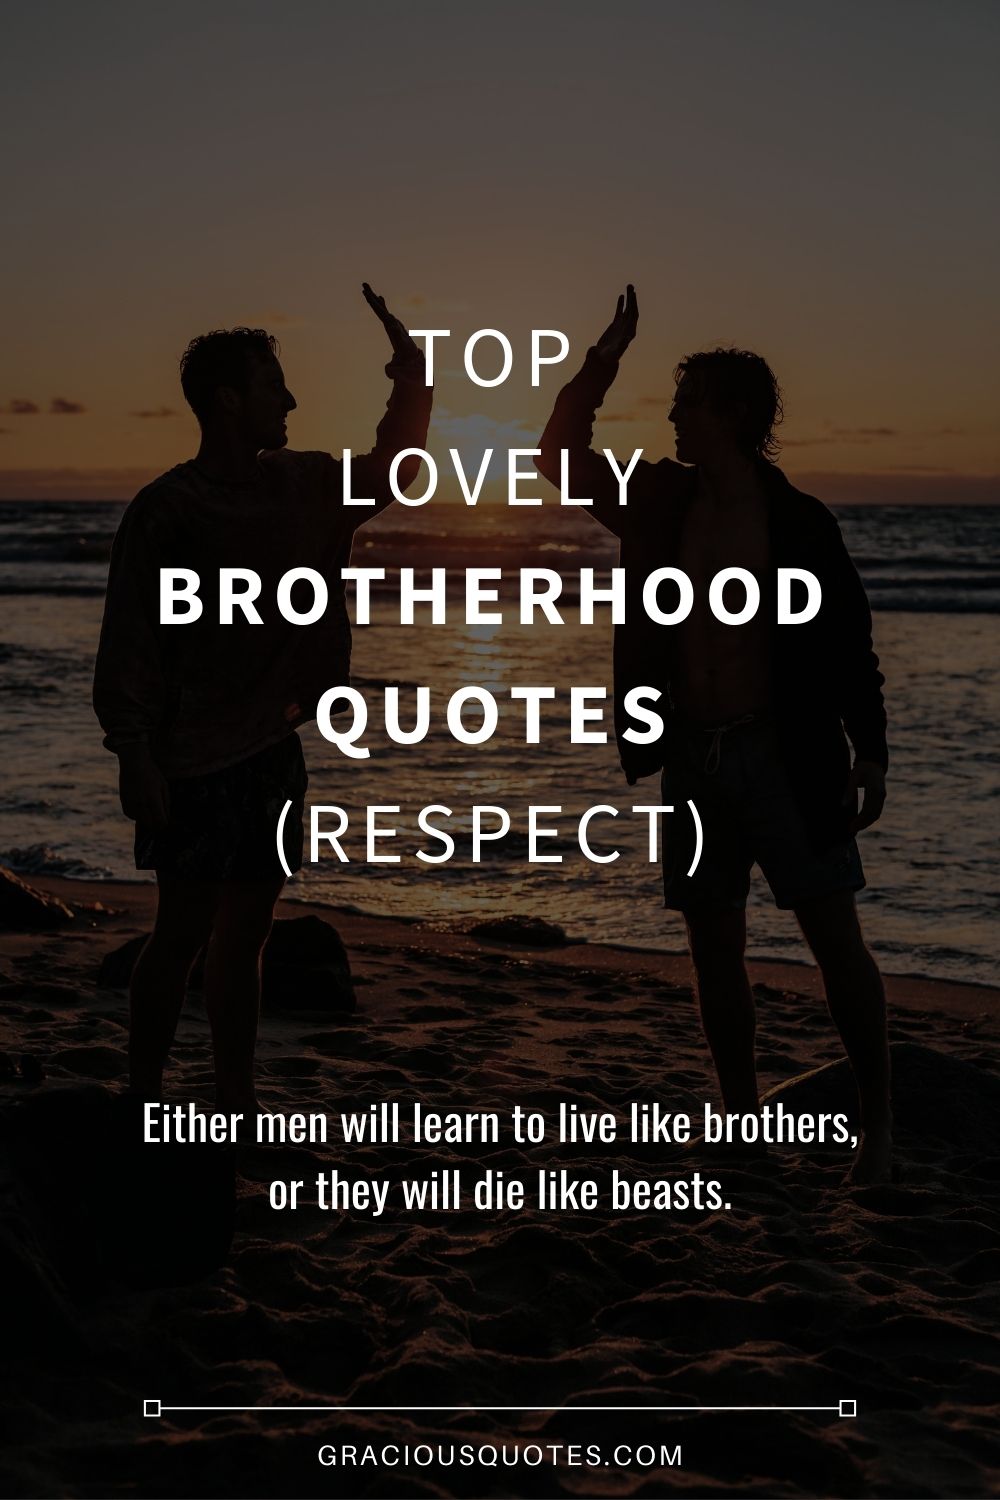 Top Lovely Brotherhood Quotes (RESPECT) - Gracious Quotes